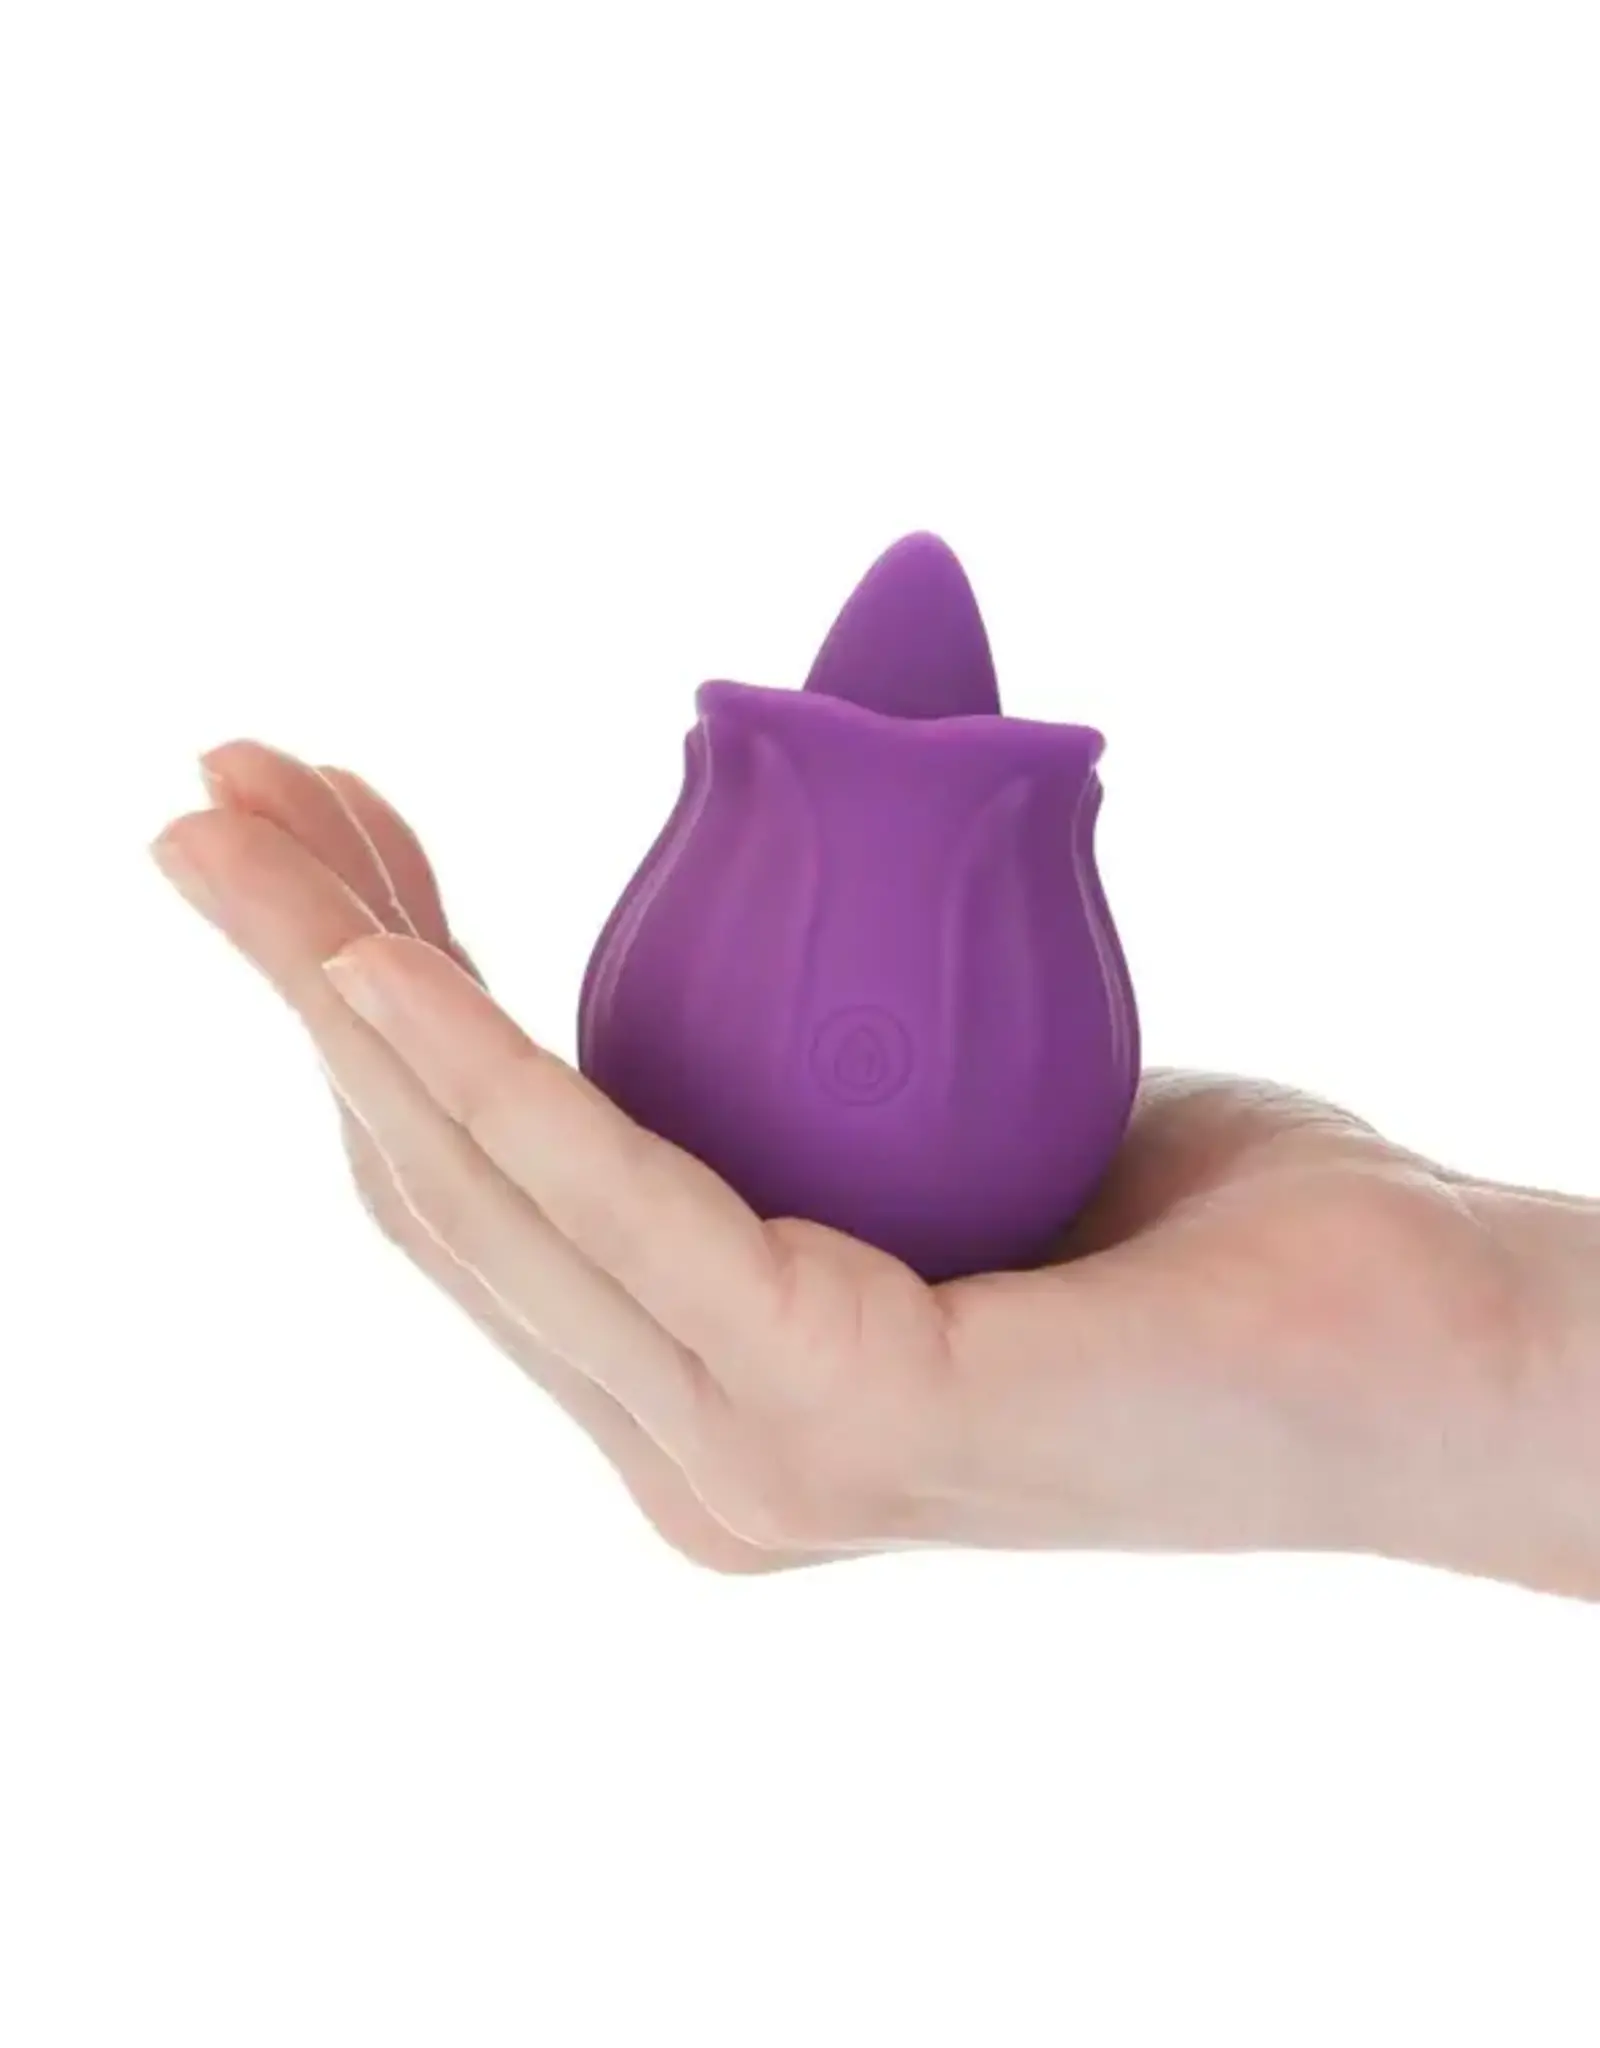 BMS Factory Happy Meeting - Clitoral Rose Flickering Toy - Purple